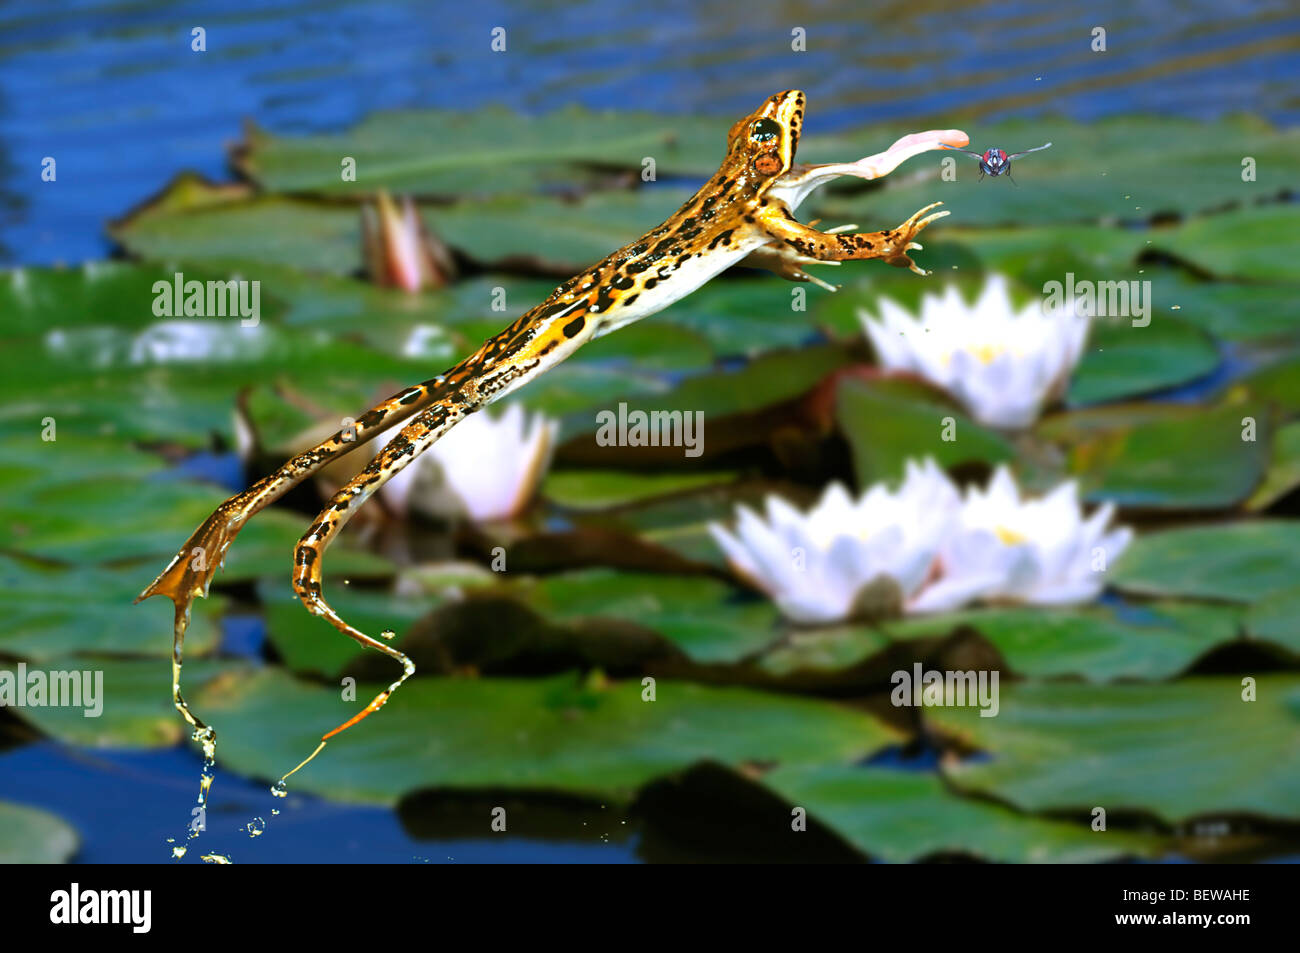 green frog (Rana lessonae) catching his prey, side view Stock Photo